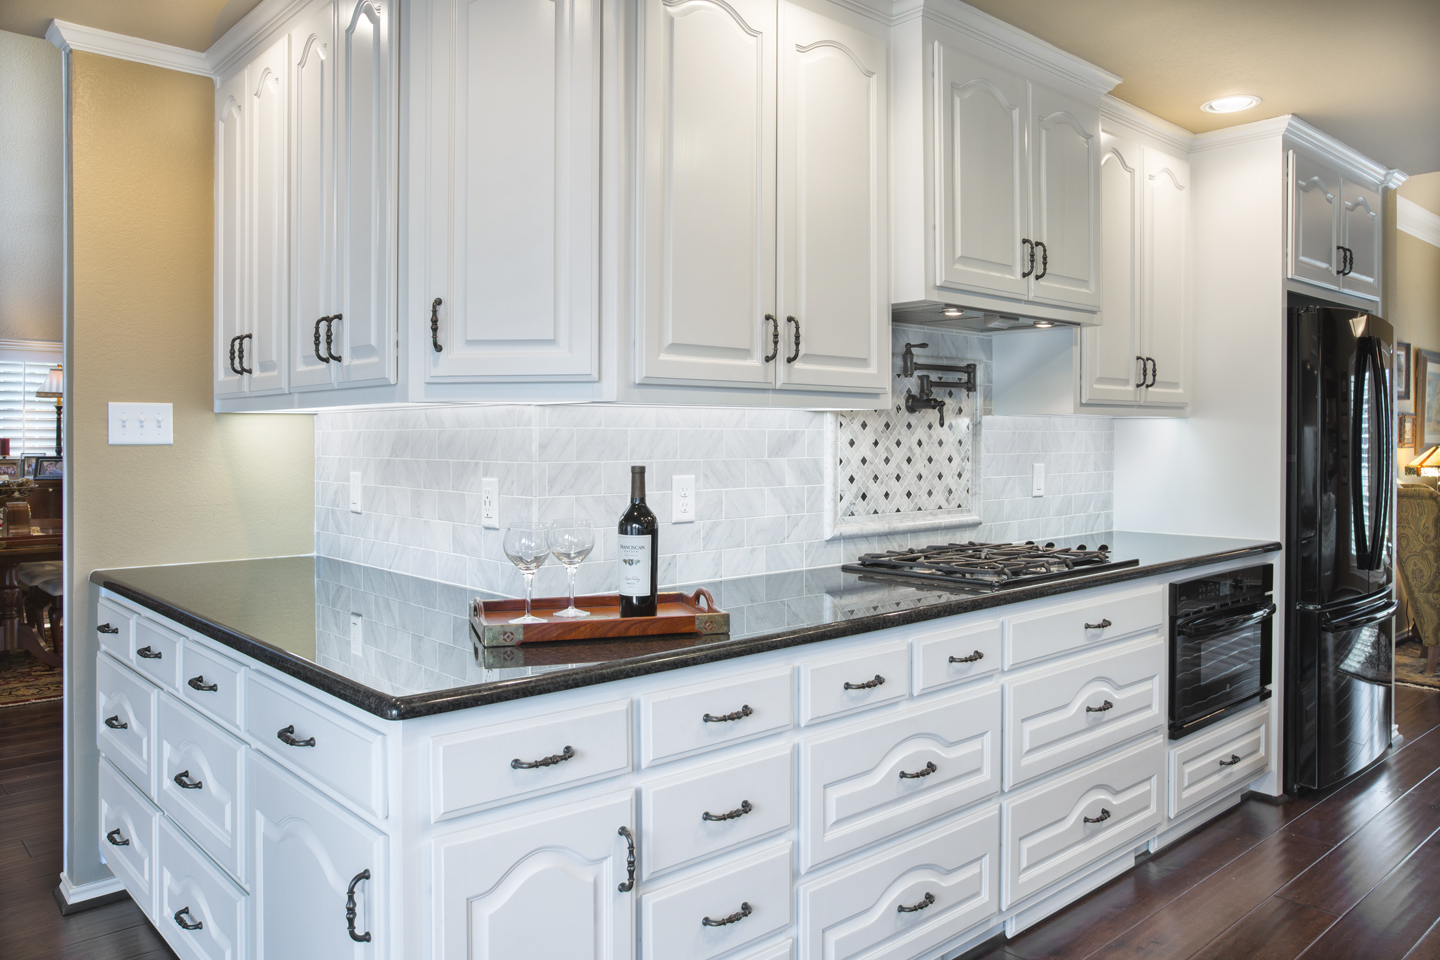 A Mini Remodel With White Cabinets Kitchen Mart